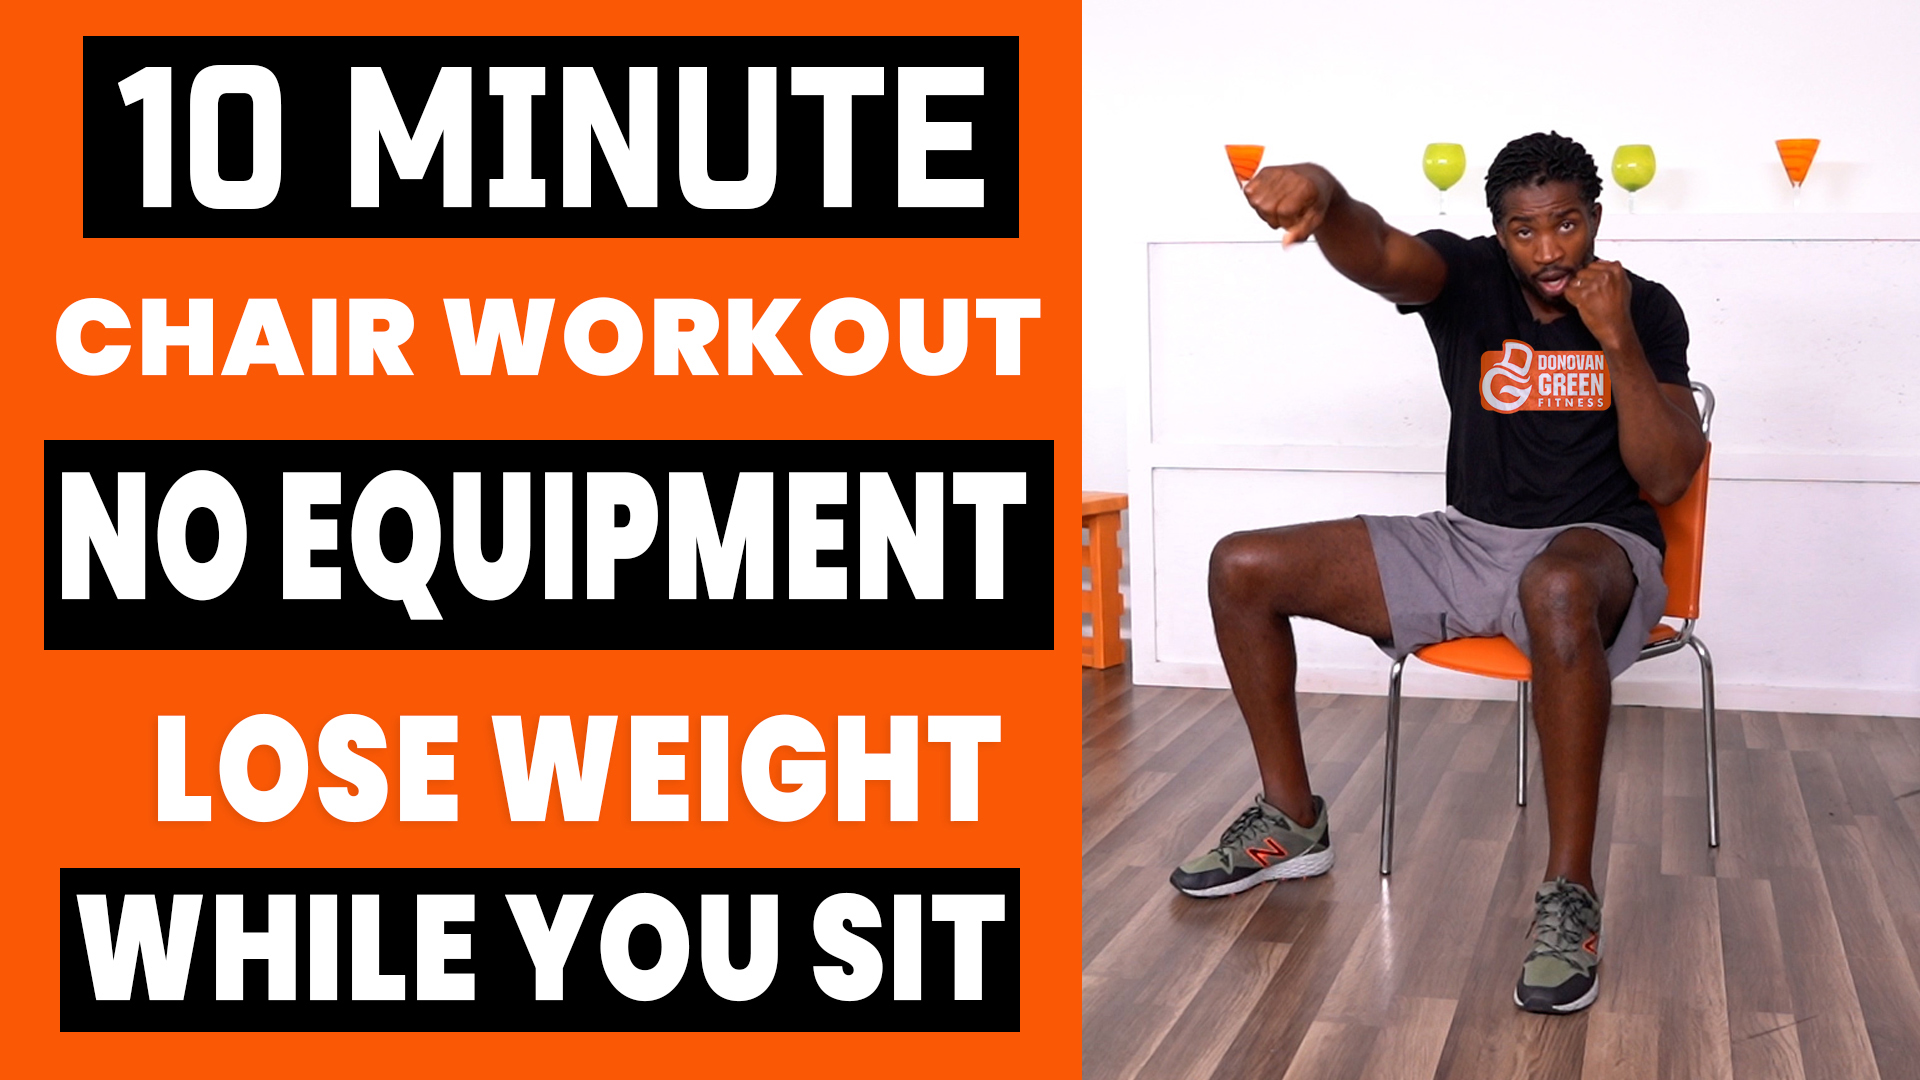 10 Minute Chair Workout For Weight Loss with NO EQUIPMENT